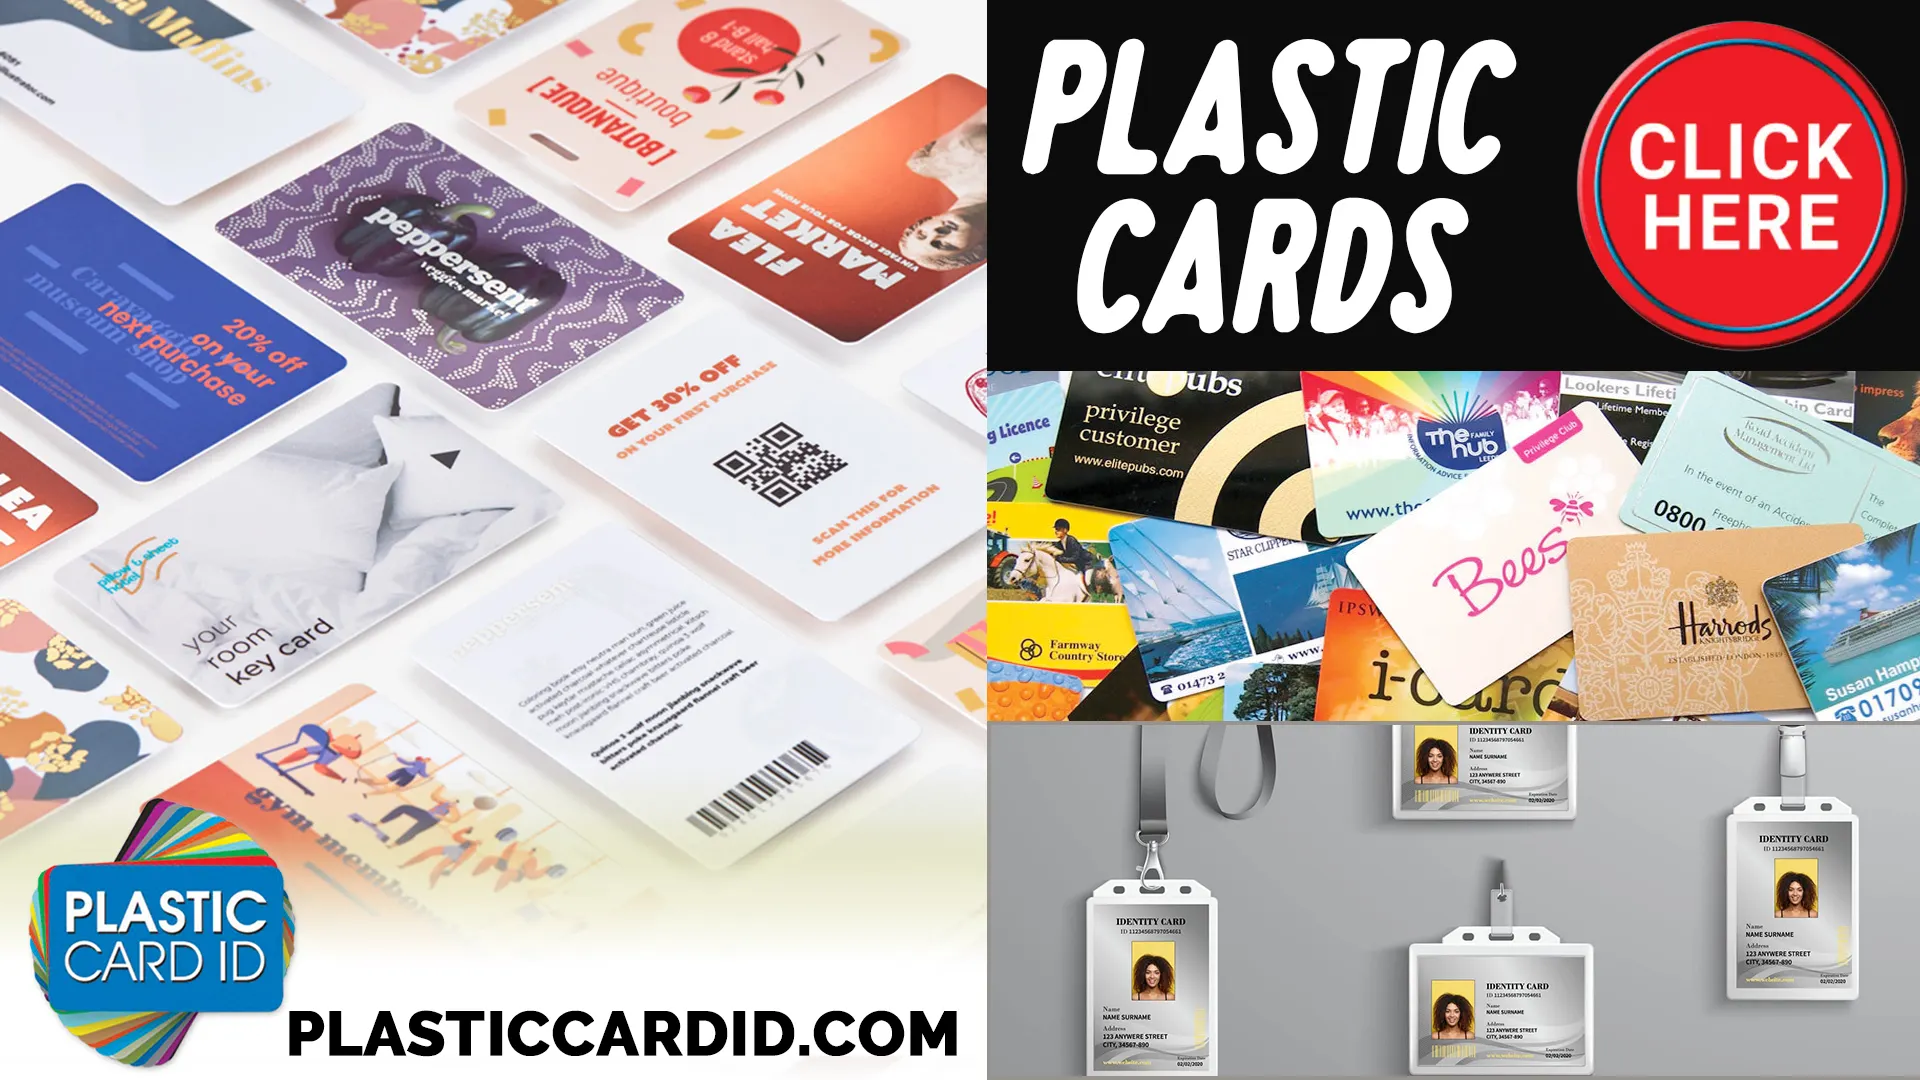 A Look at Plastic Card Lifecycle and Alternatives